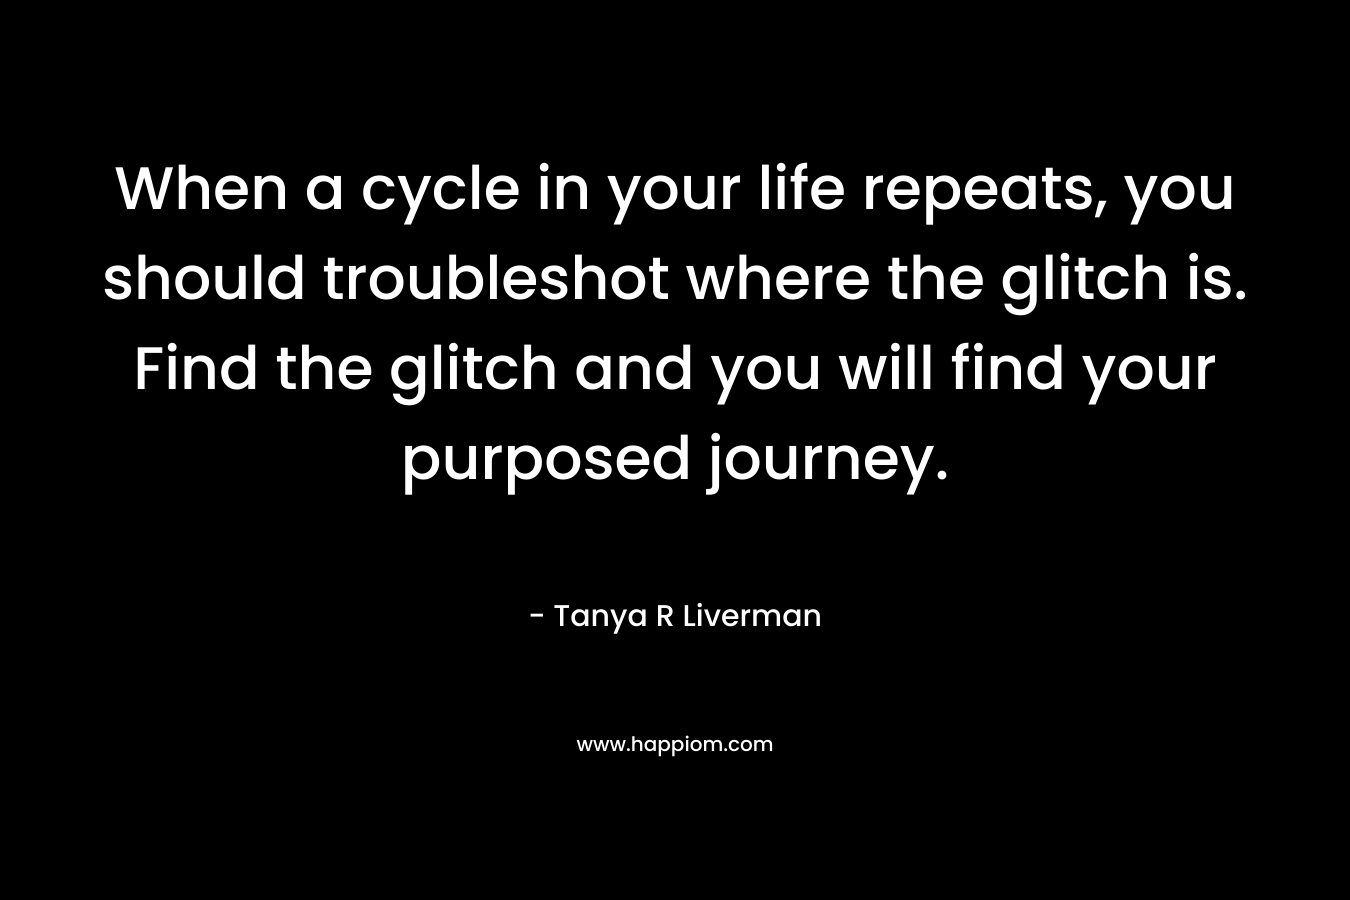 When a cycle in your life repeats, you should troubleshot where the glitch is. Find the glitch and you will find your purposed journey.